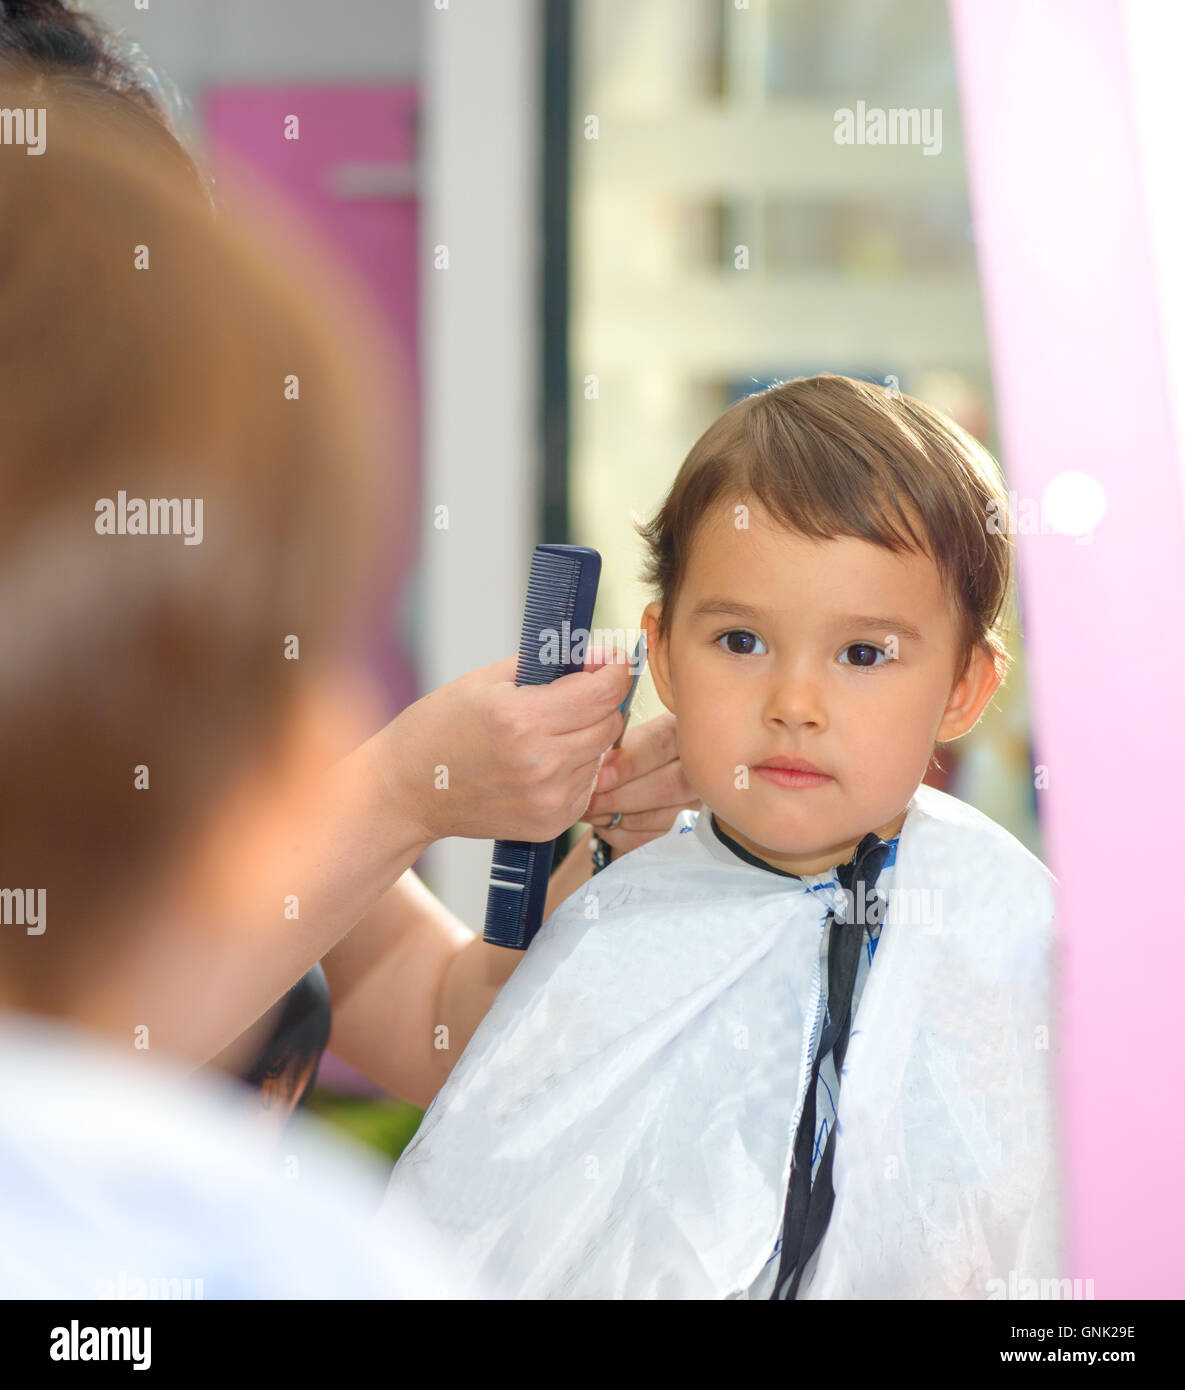 Toddler child getting his first haircut Stock Photo